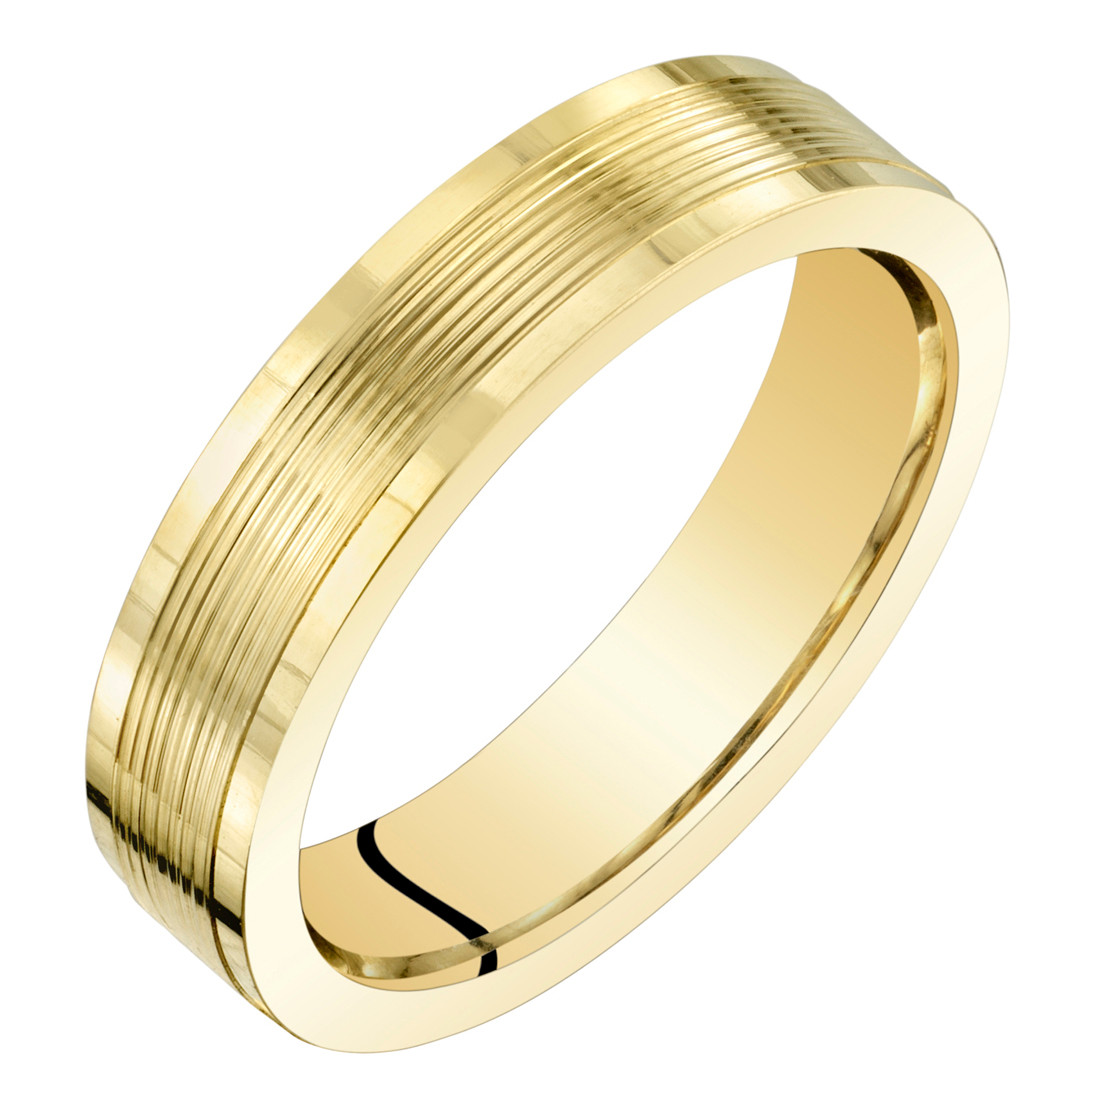 Latest Gold Ring Design For Men From Dishis Jewels | Diamond band ring |  Dishis Jewels